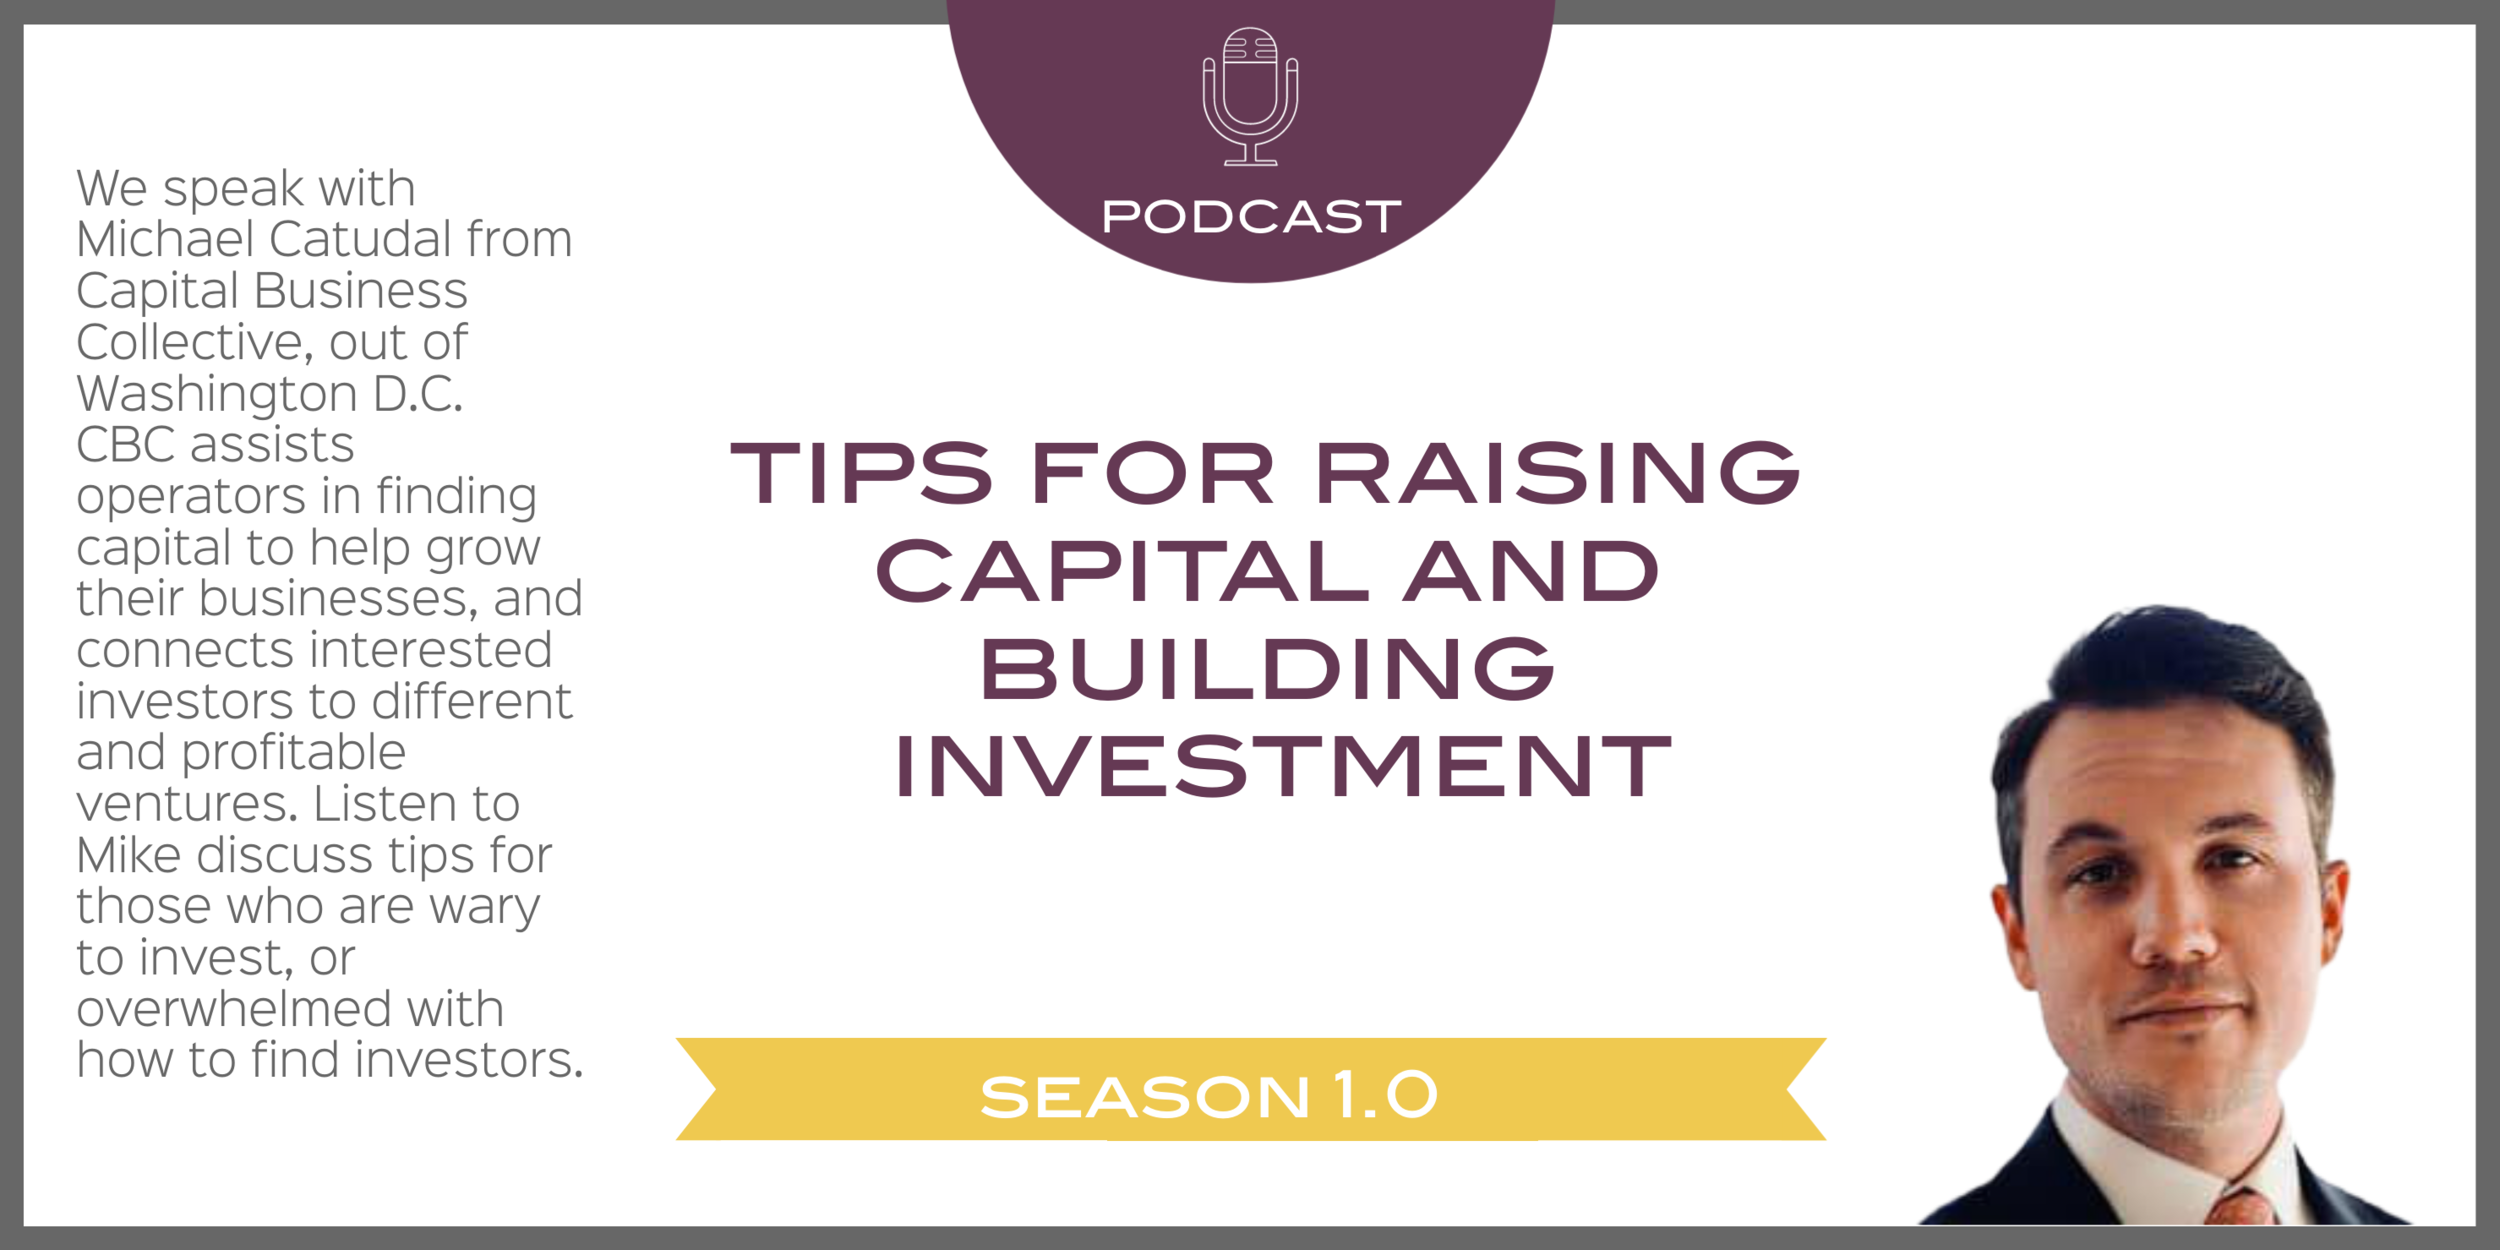 Tips for raising capital and building investments with Michael Catudal of CBC